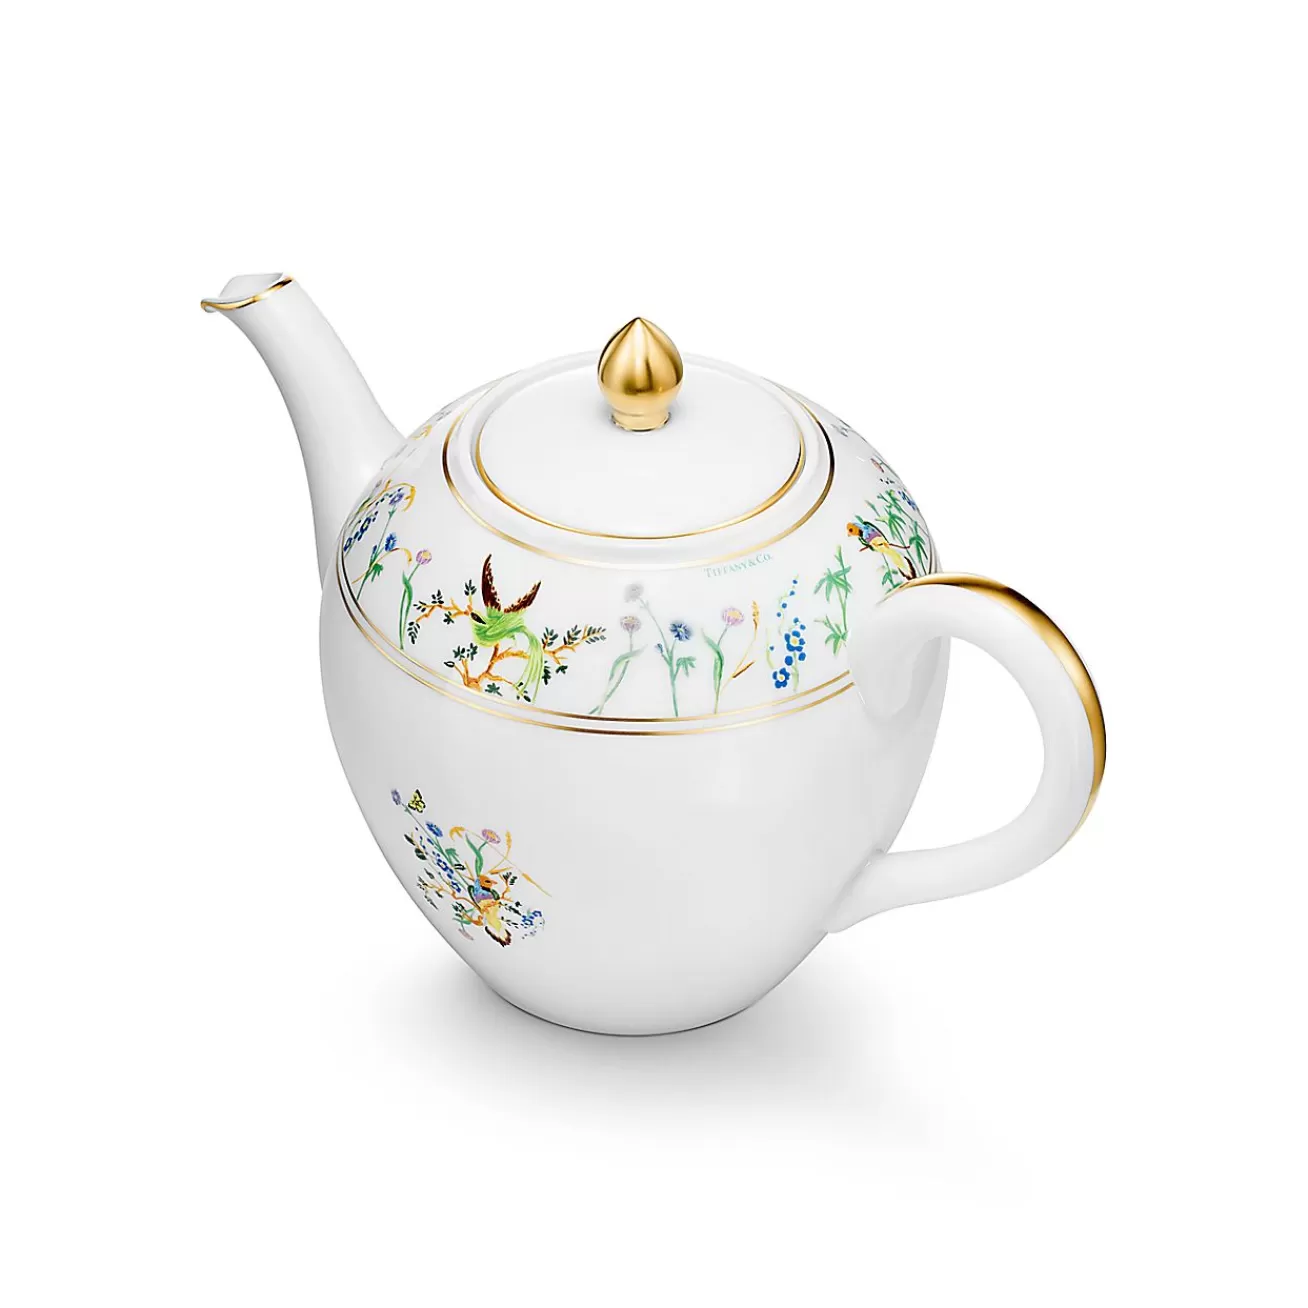 Tiffany & Co. Tiffany Jardin Teapot in Porcelain | ^ The Home | Housewarming Gifts